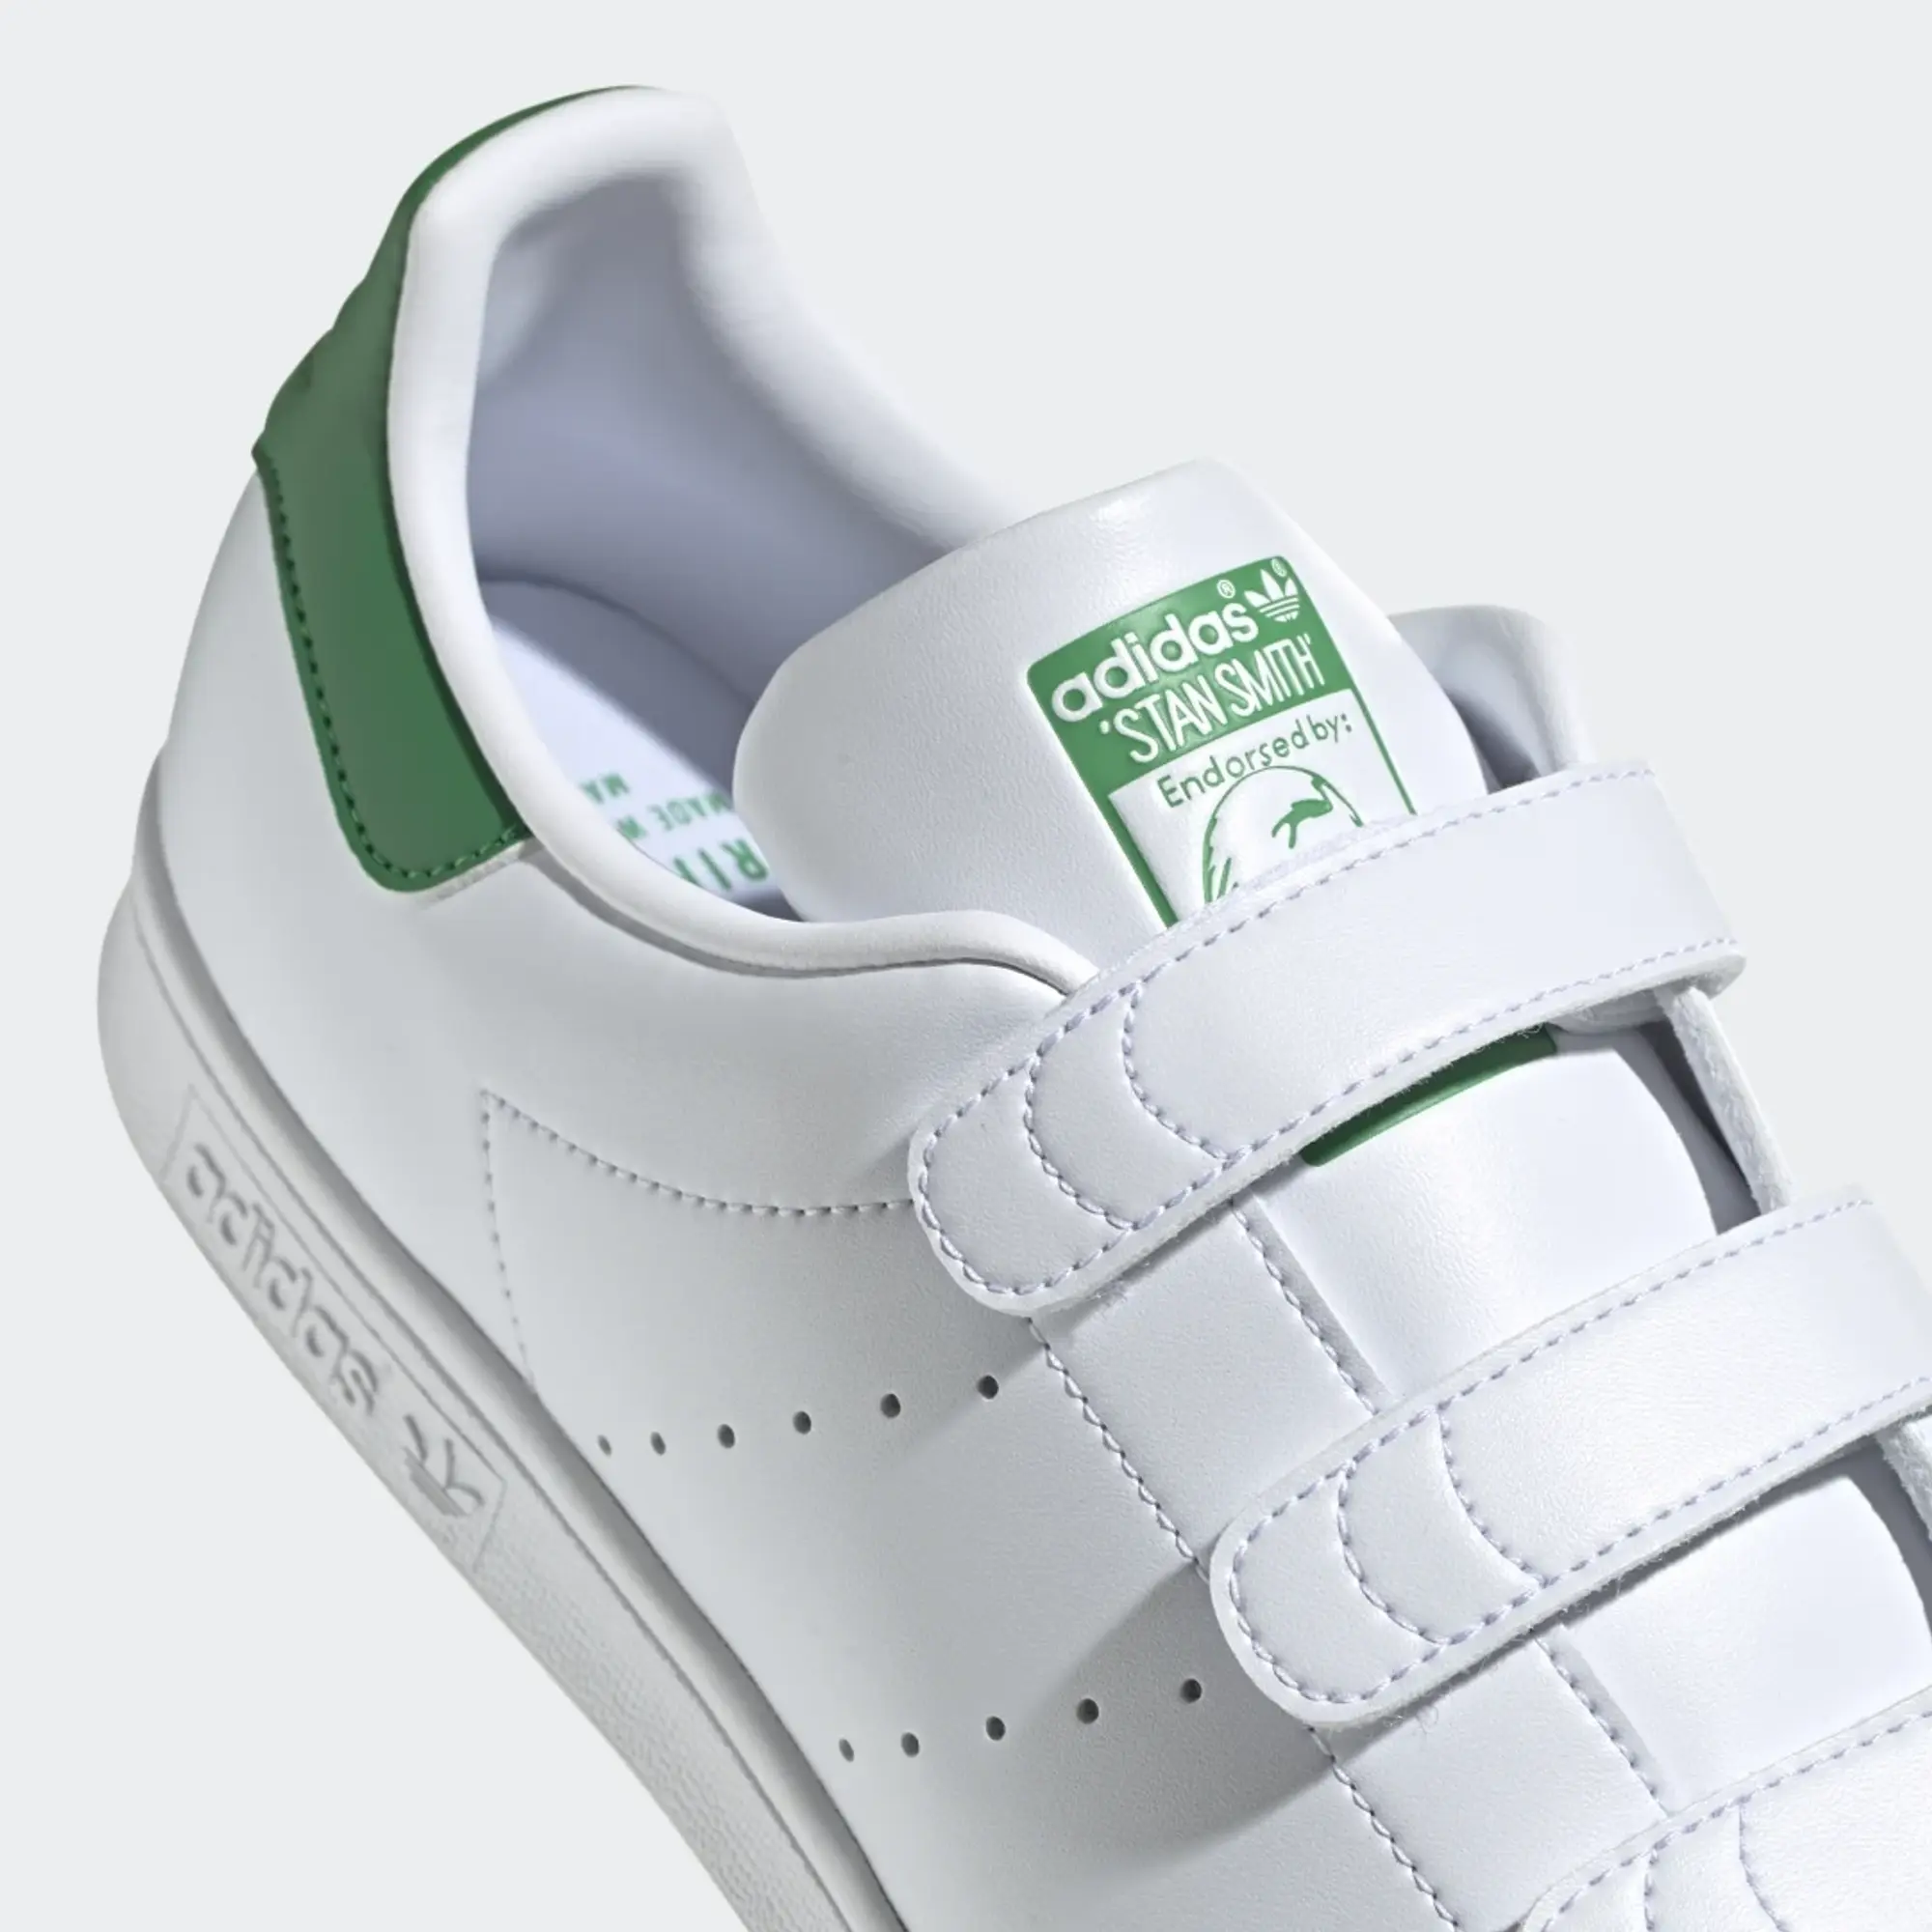 Adidas Originals Strap Stan Smith Trainers In White And Green - White